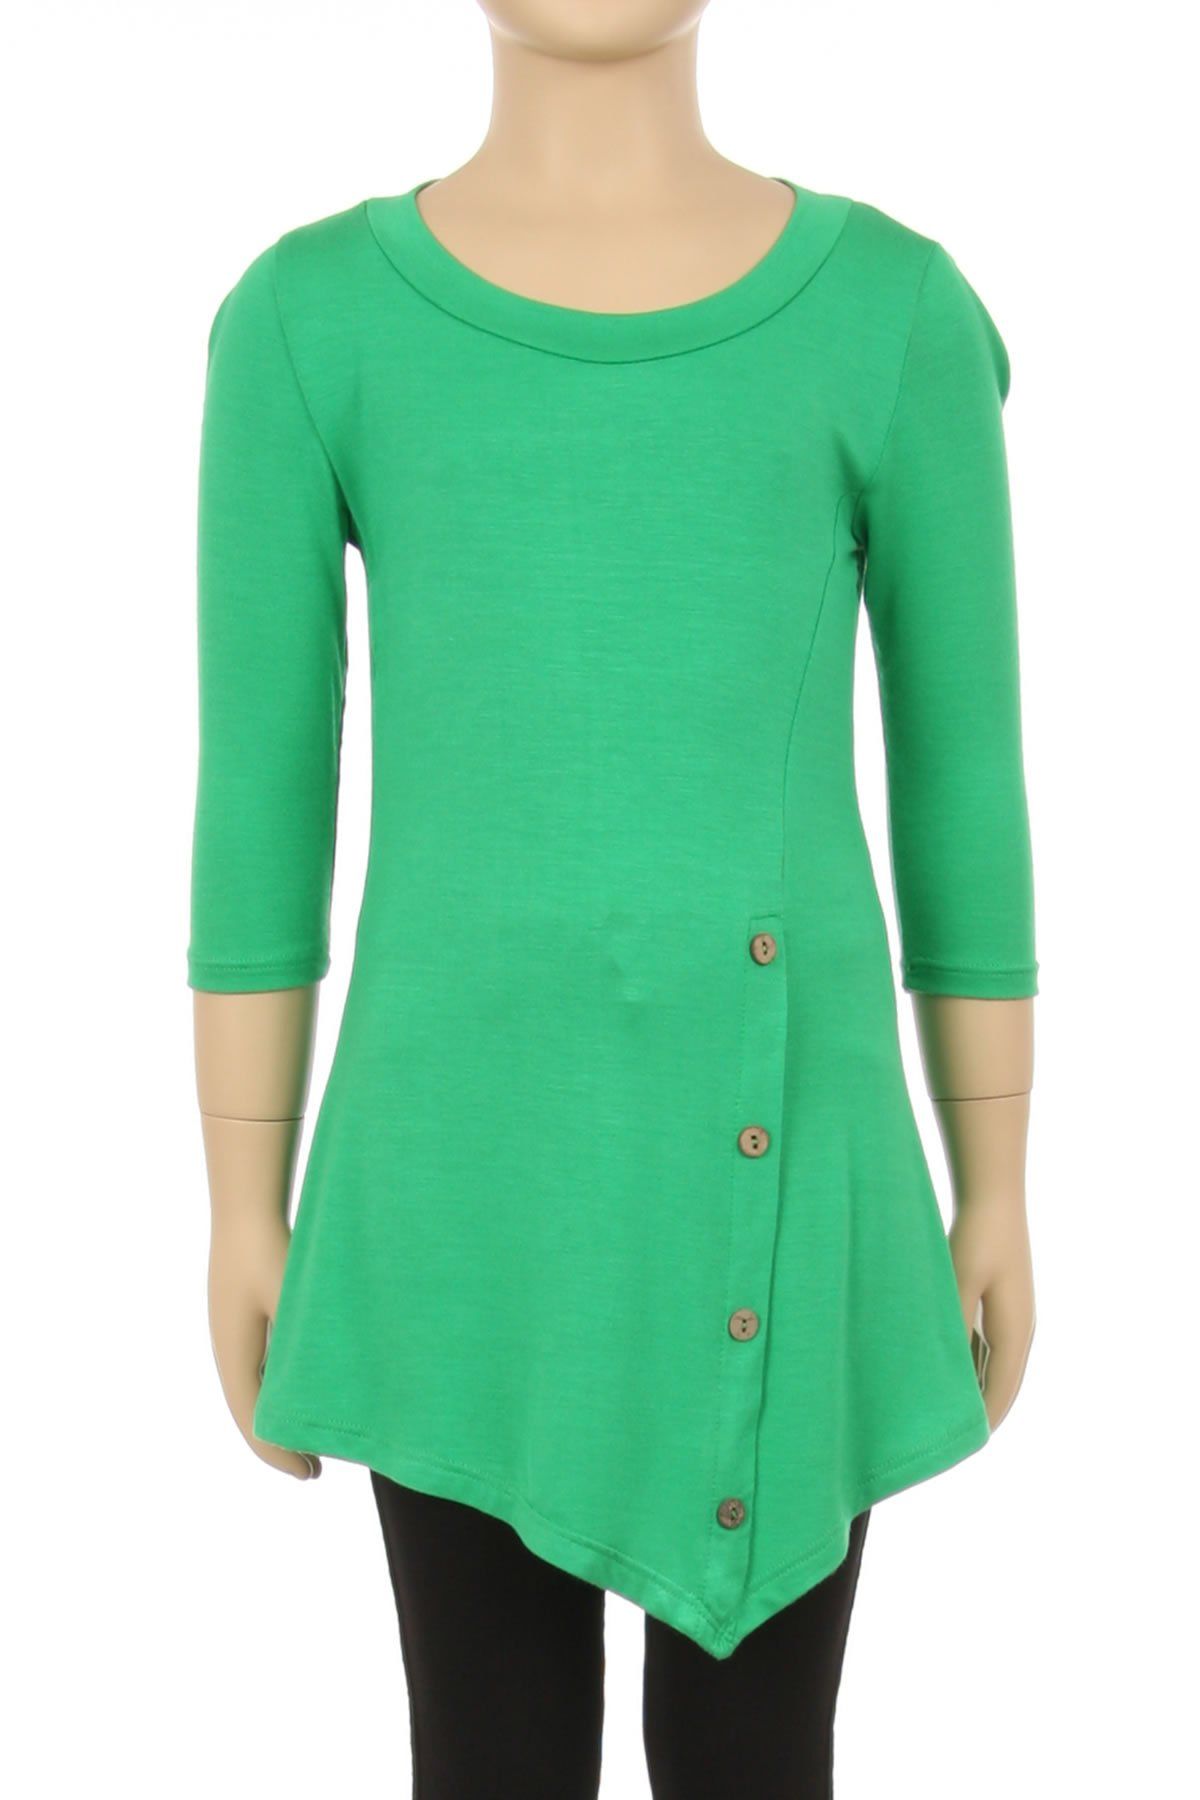 Girls Solid Green Dress Asymmetric 3/4 Sleeve Tunic Top Tops MomMe and More 